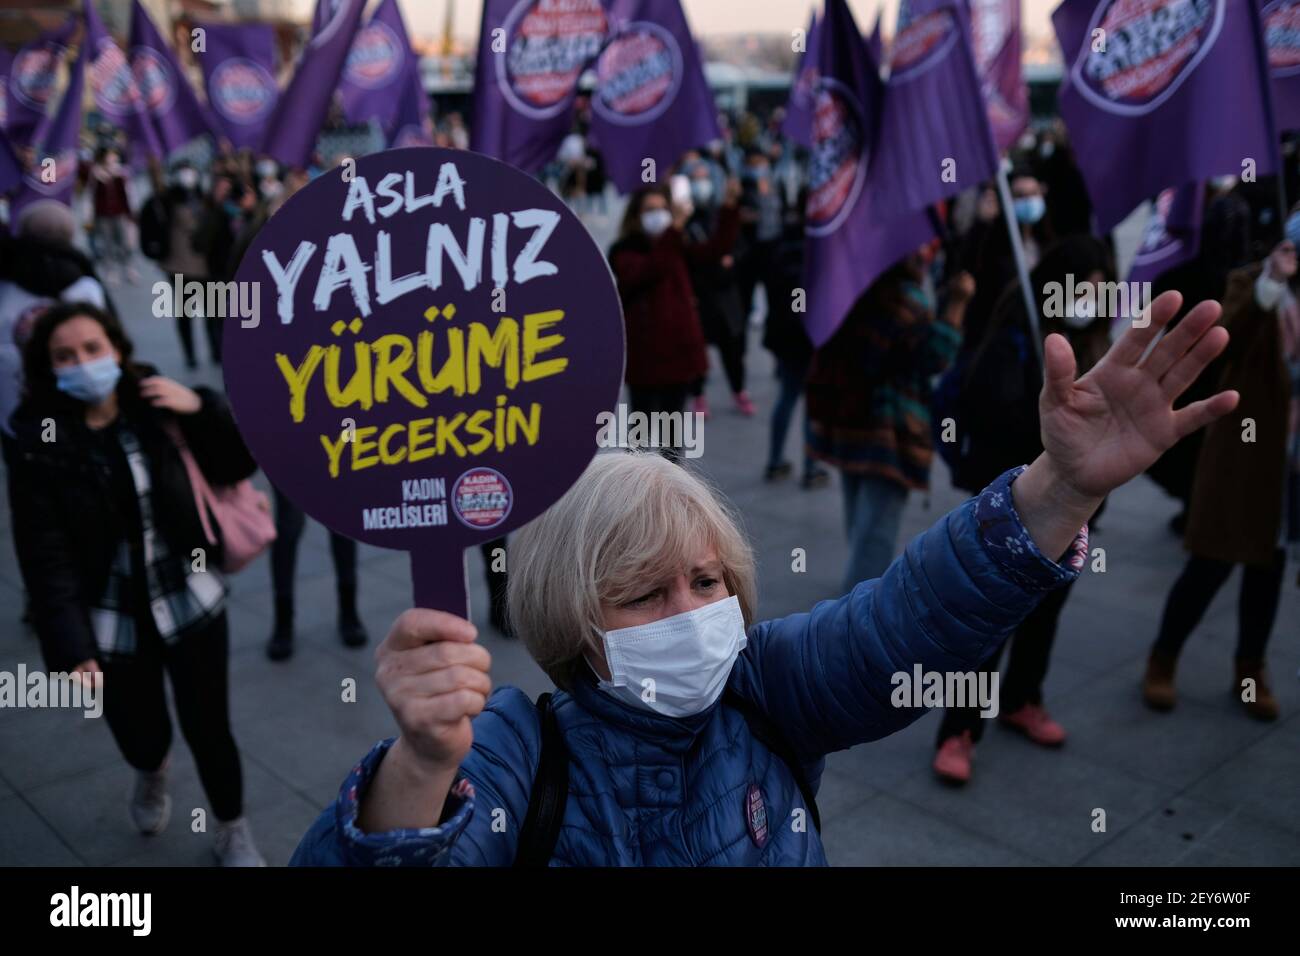 A demonstrator wearing a face mask to prevent the spread of the coronavirus disease (COVID-19), holds a placard reading 'You Will Never Walk Alone' during a protest against femicide and violence against women, in Istanbul, Turkey March 5, 2021. REUTERS/Murad Sezer Stock Photo